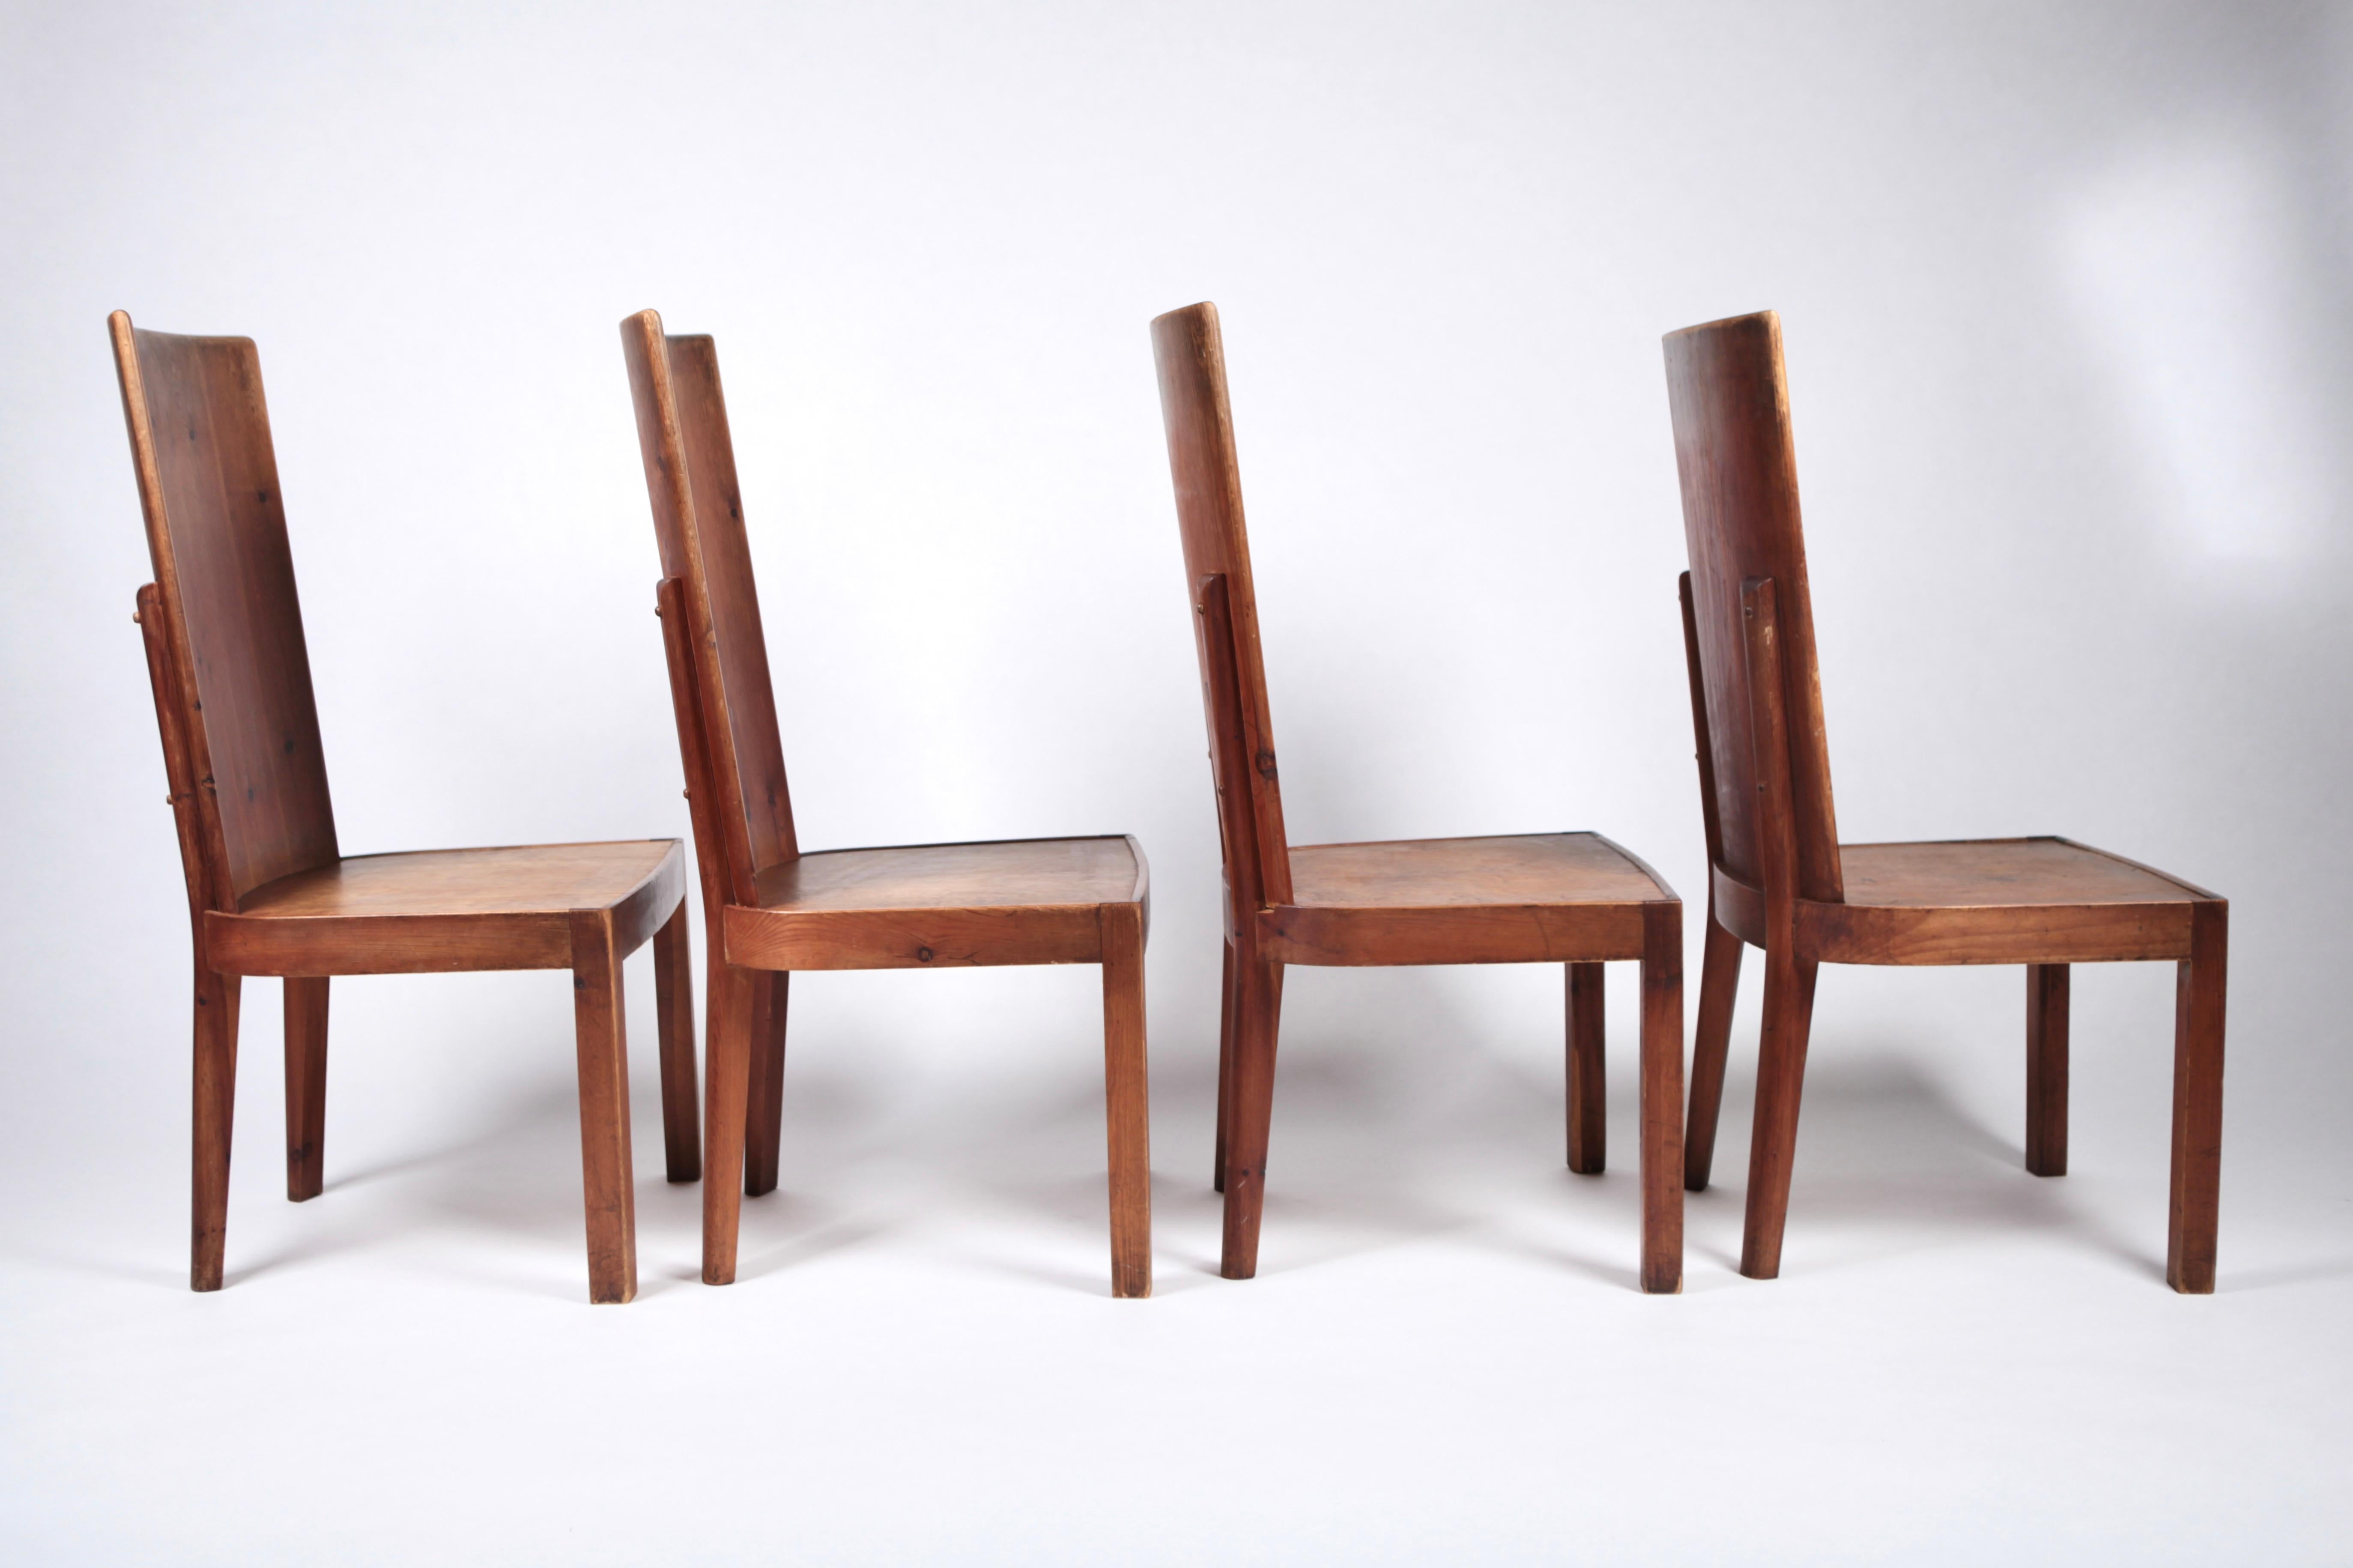 Set of 4 High Back Stained Pine Chairs, Attributed to Axel Einar Hjorth, Sweden  For Sale 2